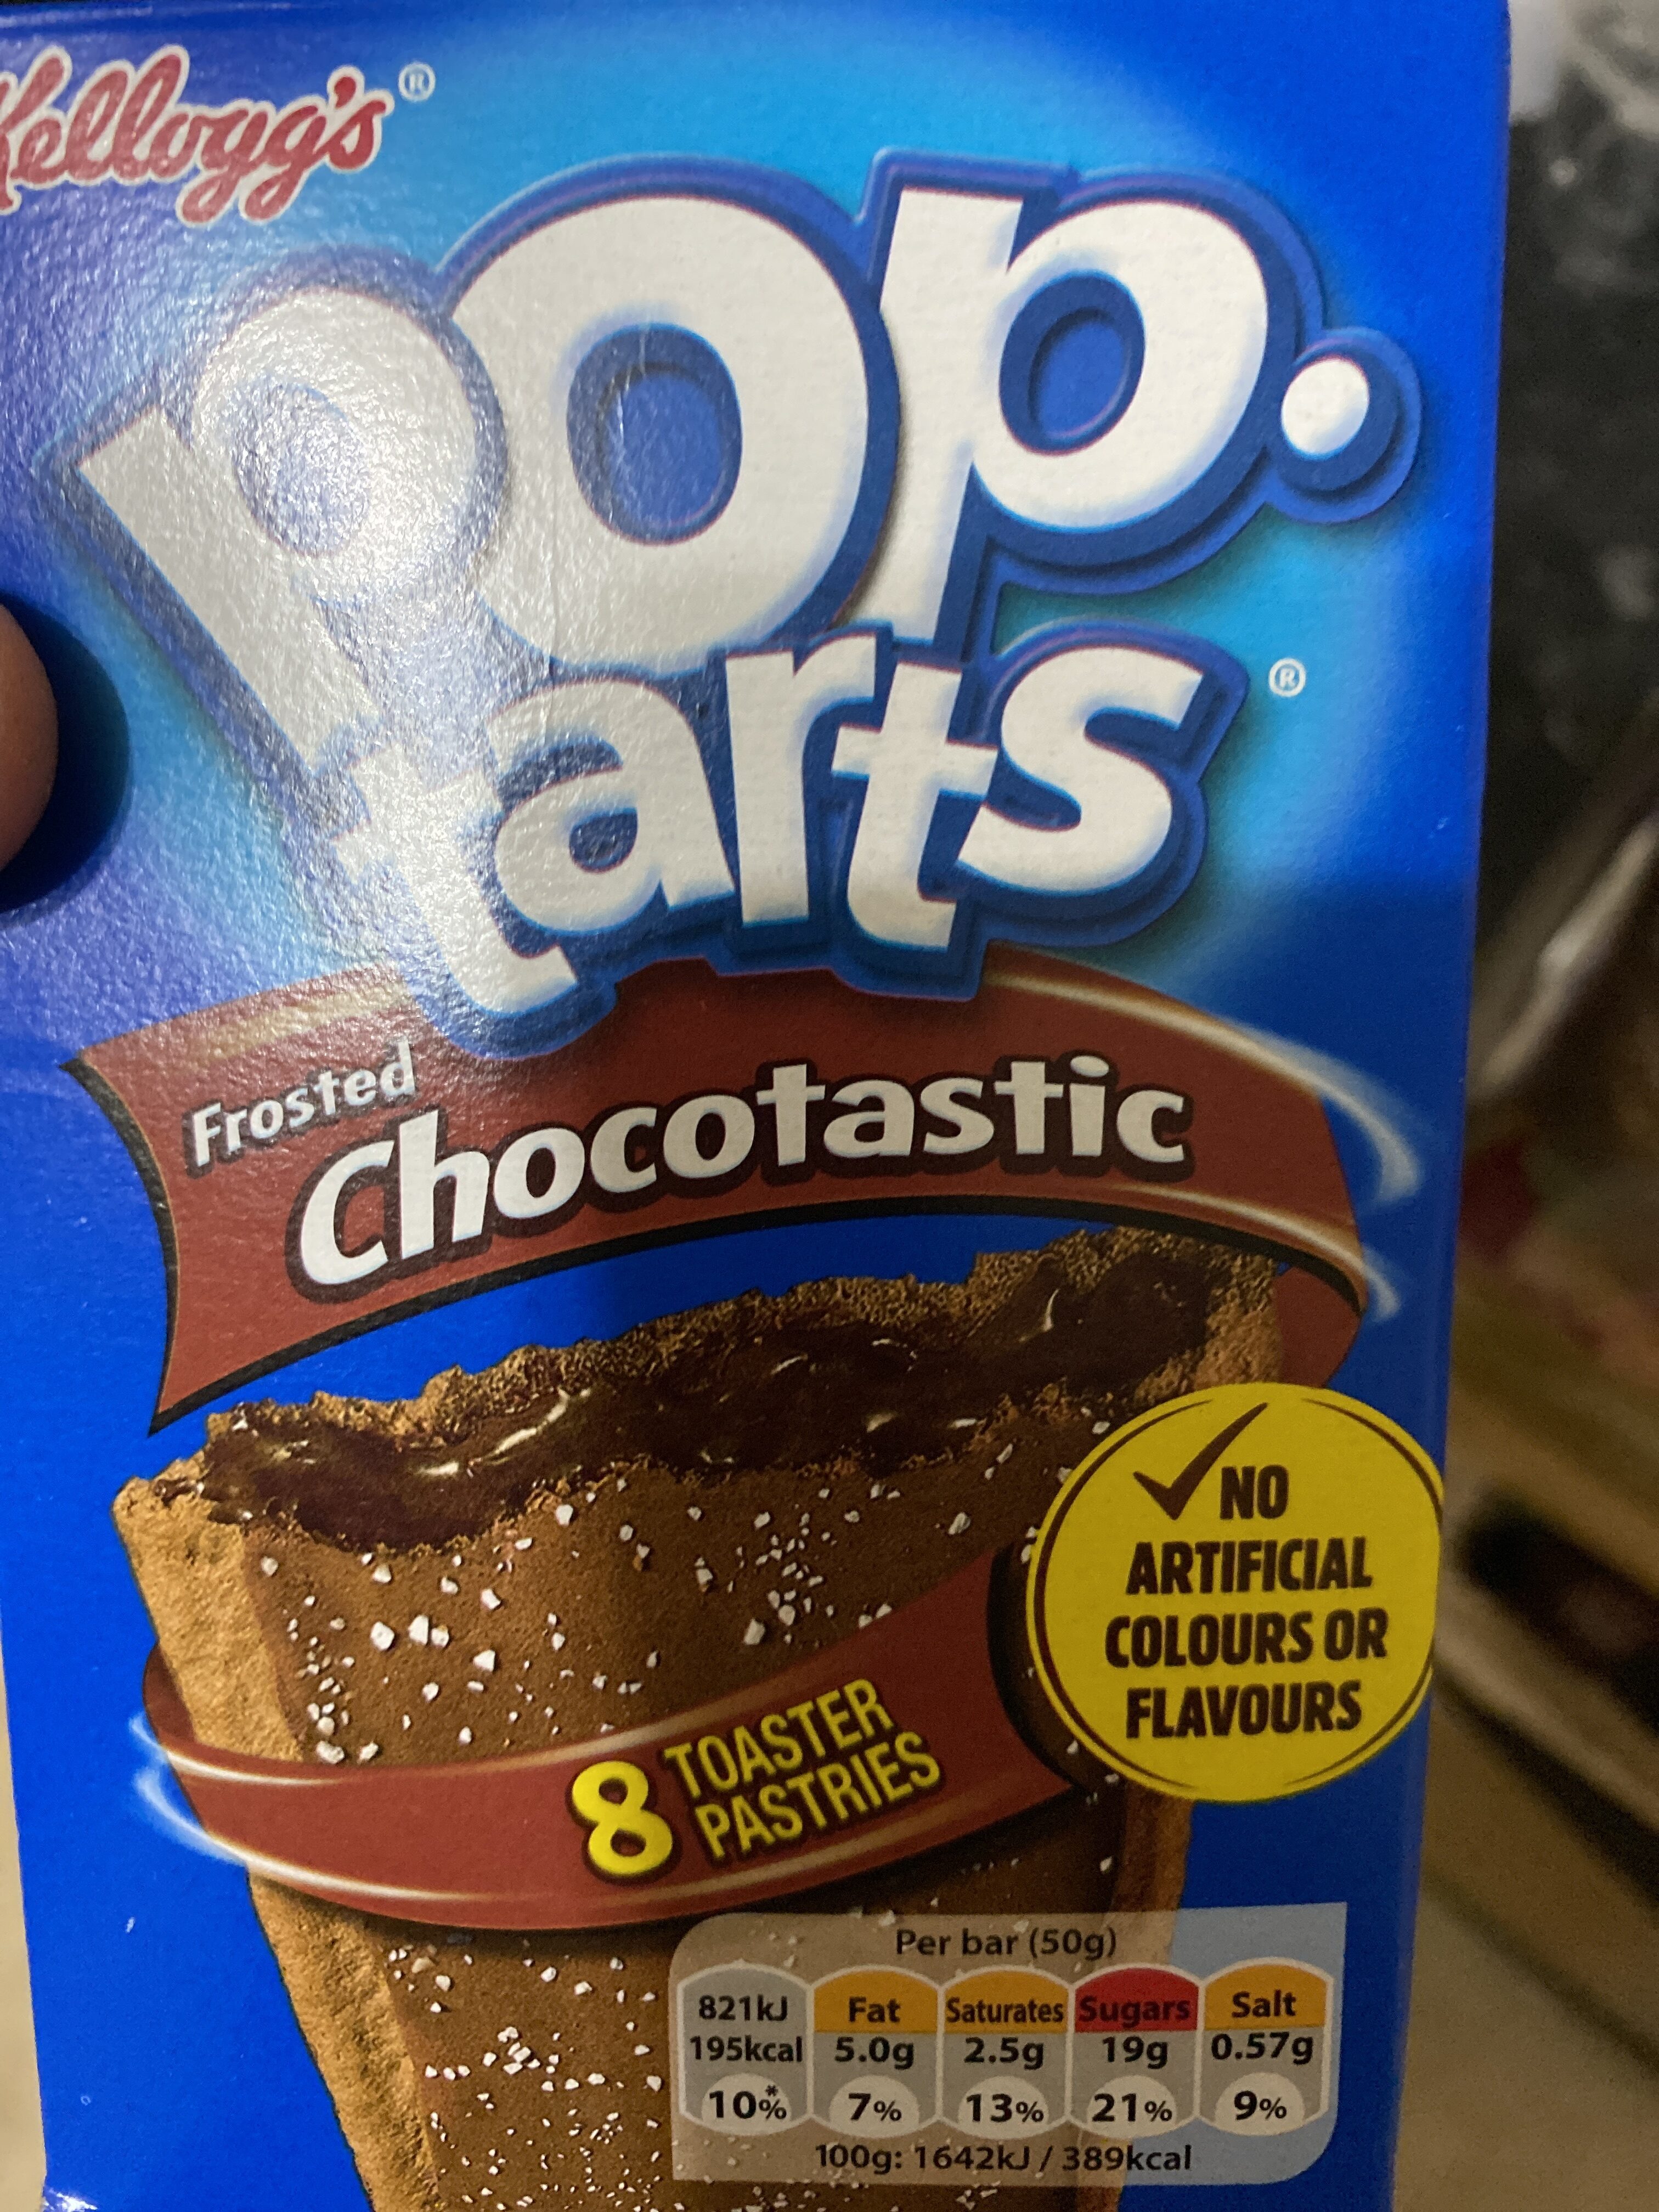 Pop Tarts Frosted Chocotastic 8 x - Product